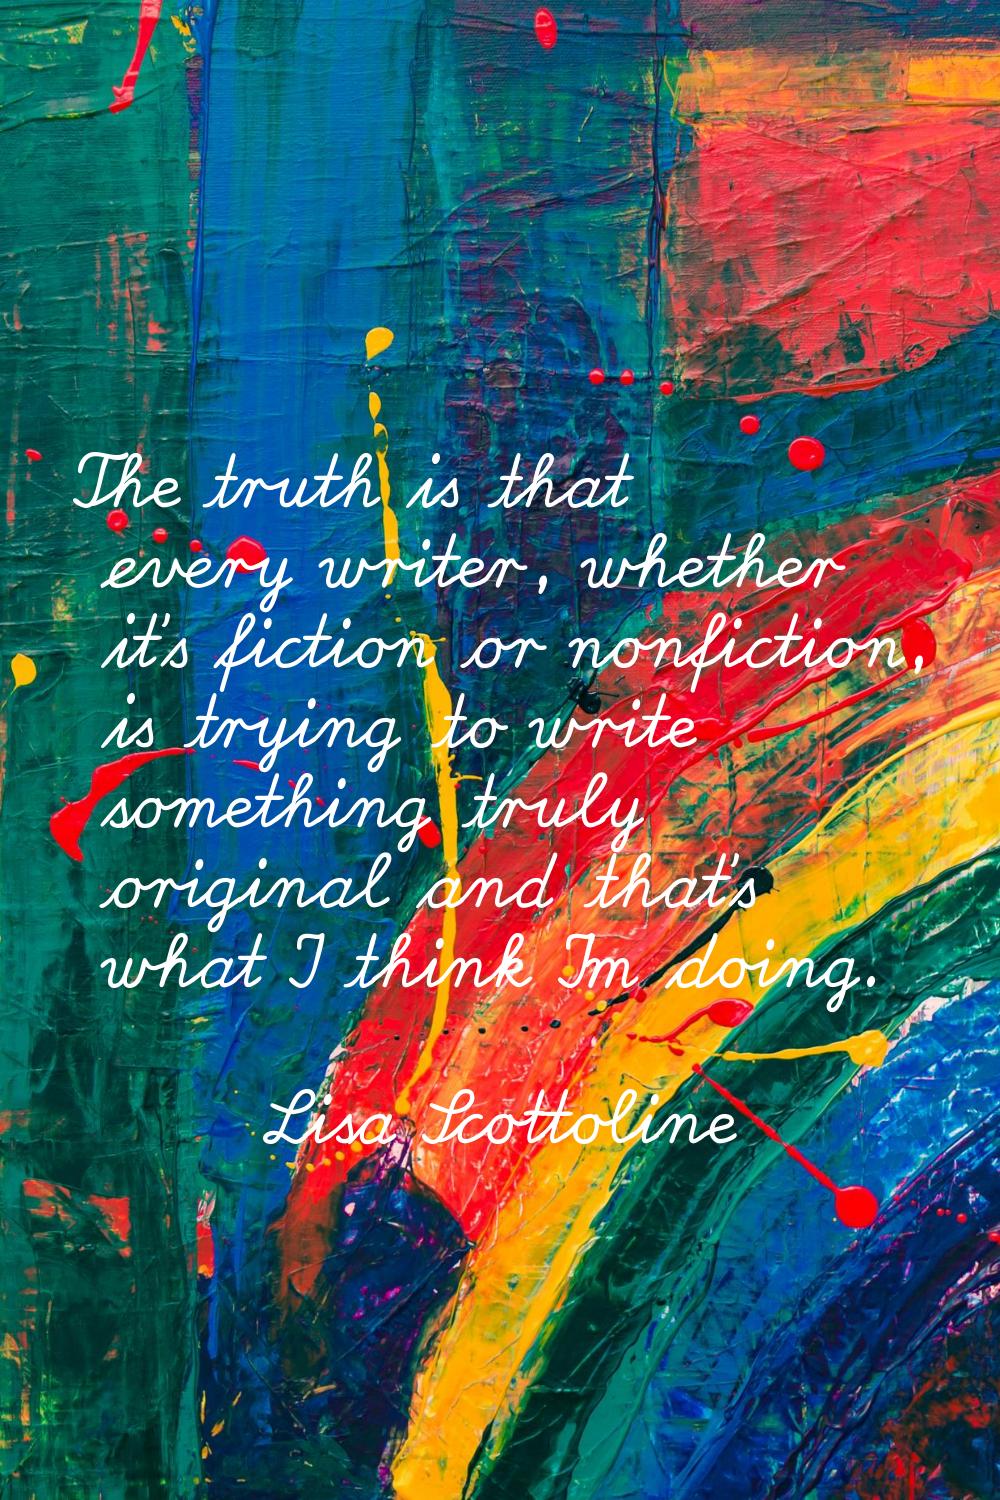 The truth is that every writer, whether it's fiction or nonfiction, is trying to write something tr